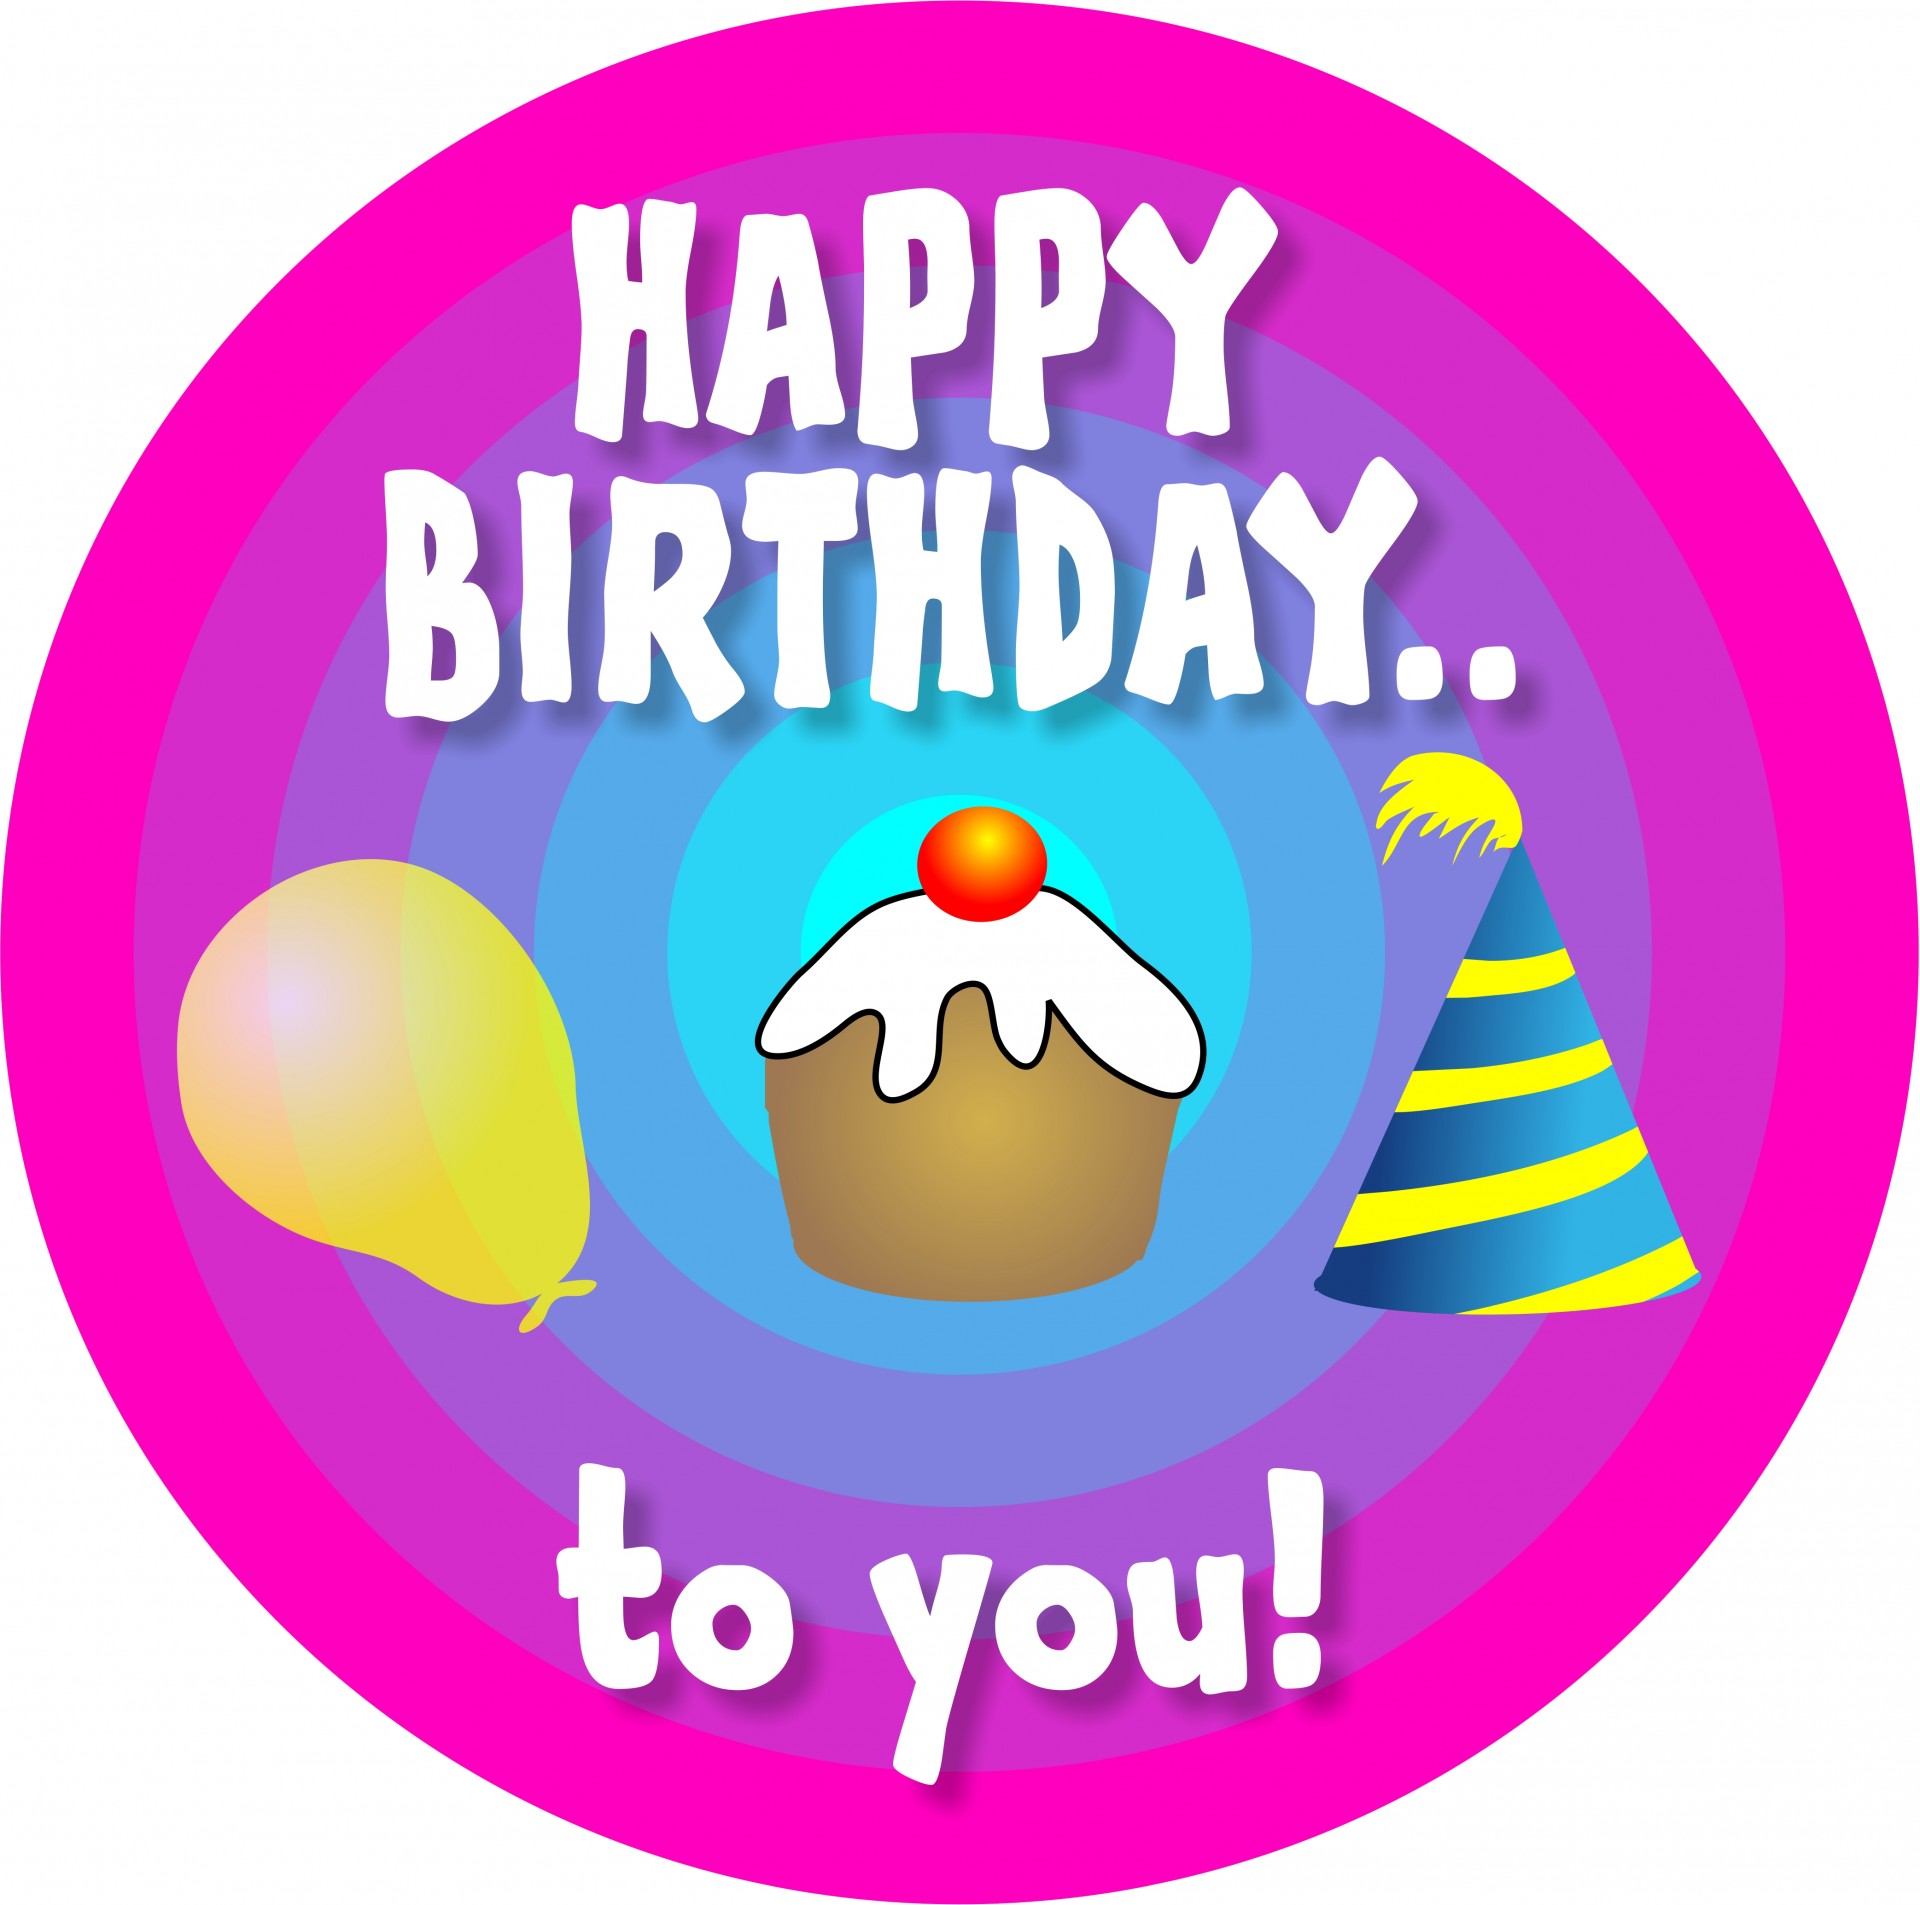 Cartoon happy birthday greeting with a cupcake, party hat and balloon.